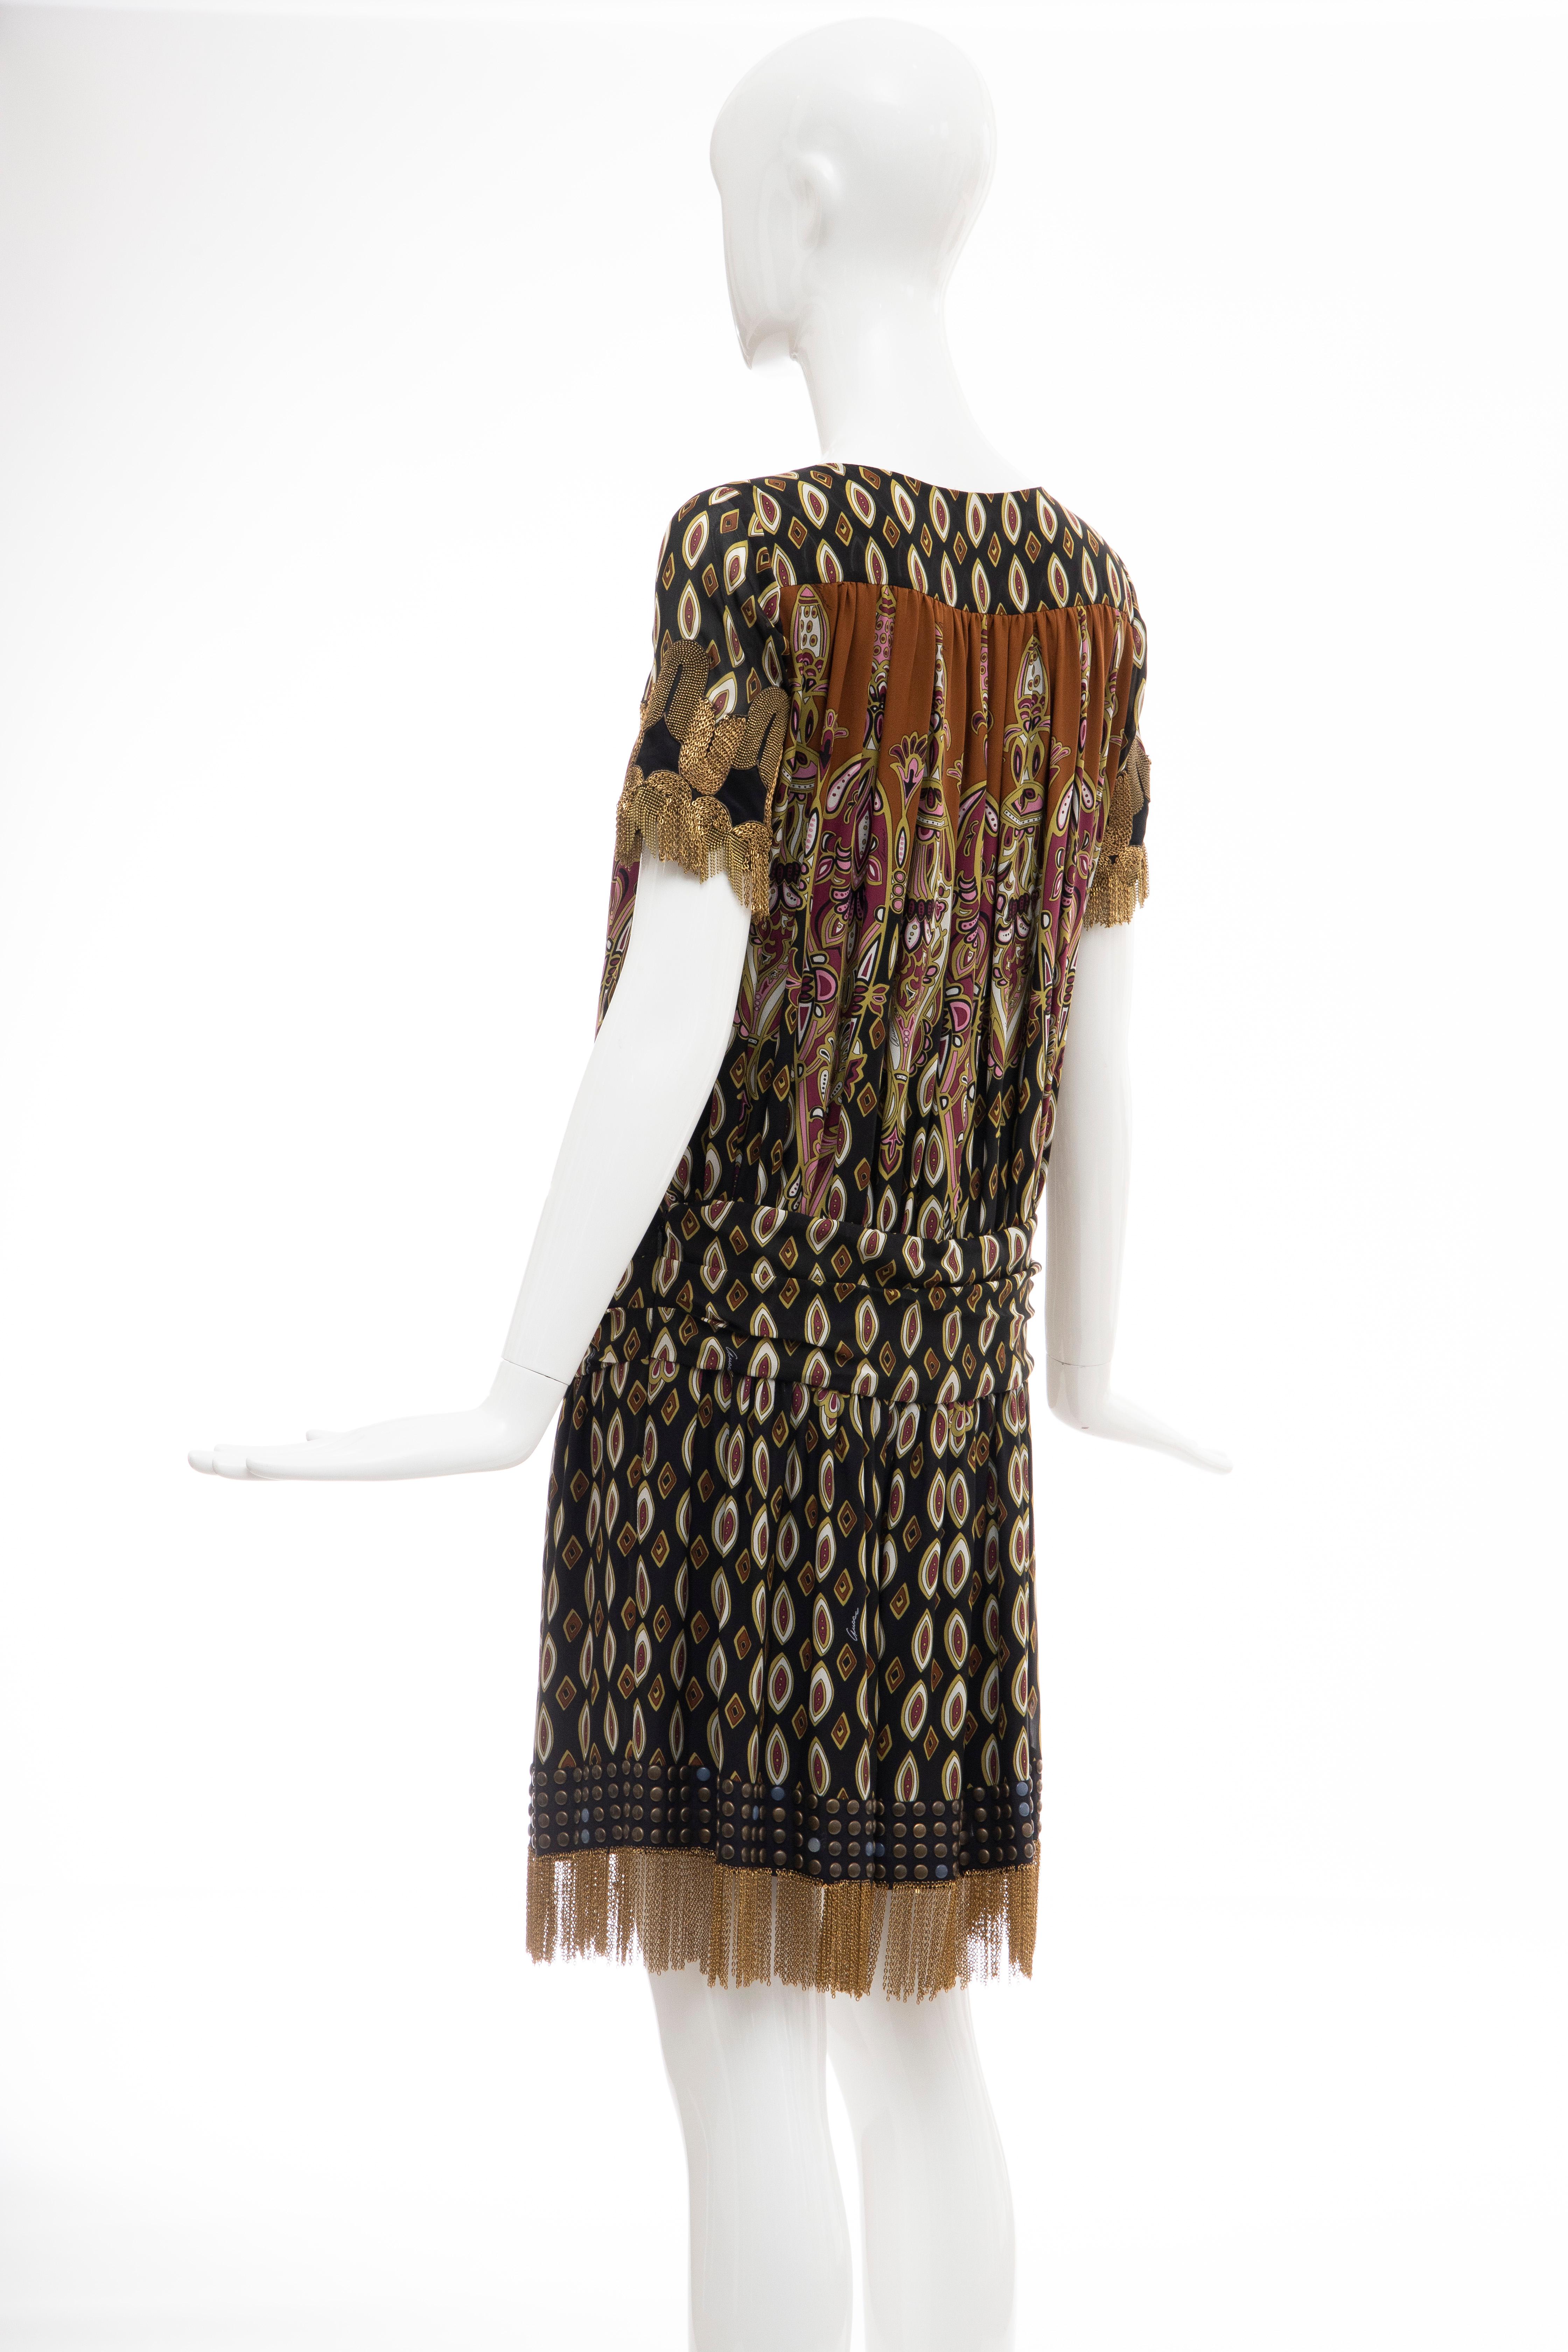 Frida Giannini for Gucci Runway Silk Boteh Pattern Brass Chains Dress, Fall 2008 For Sale 4